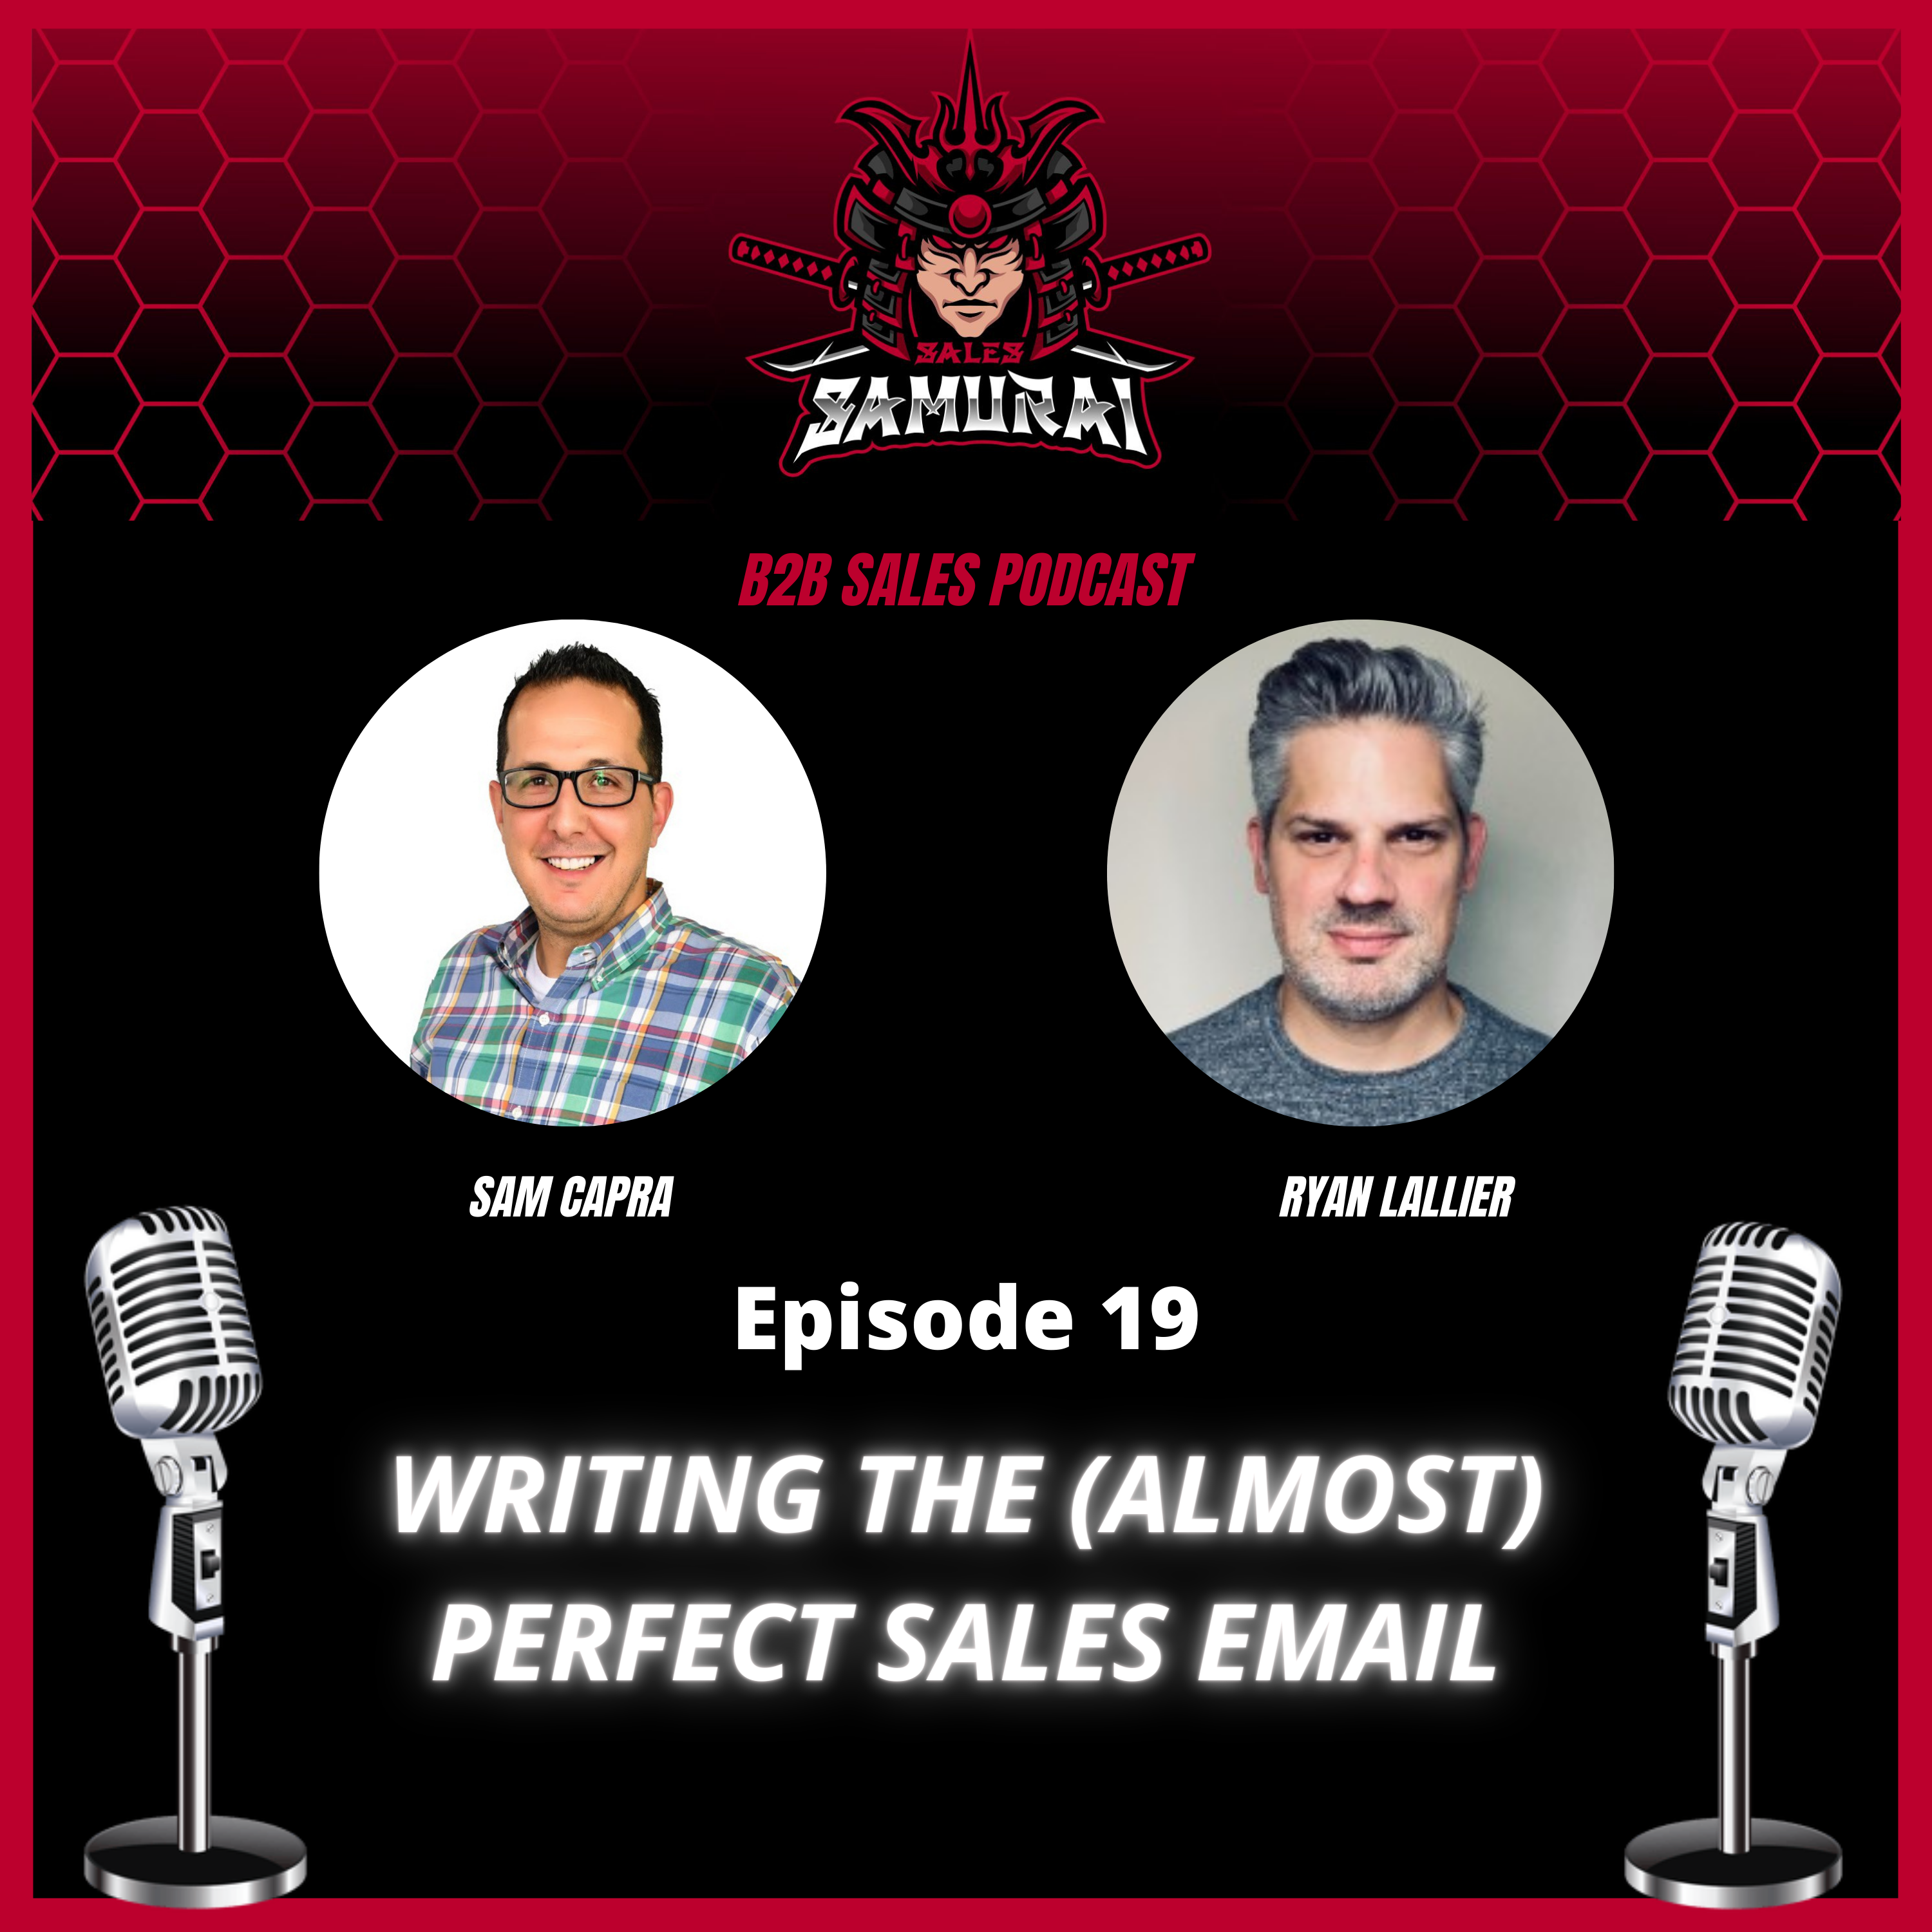 Writing the (ALMOST) PERFECT Sales Email